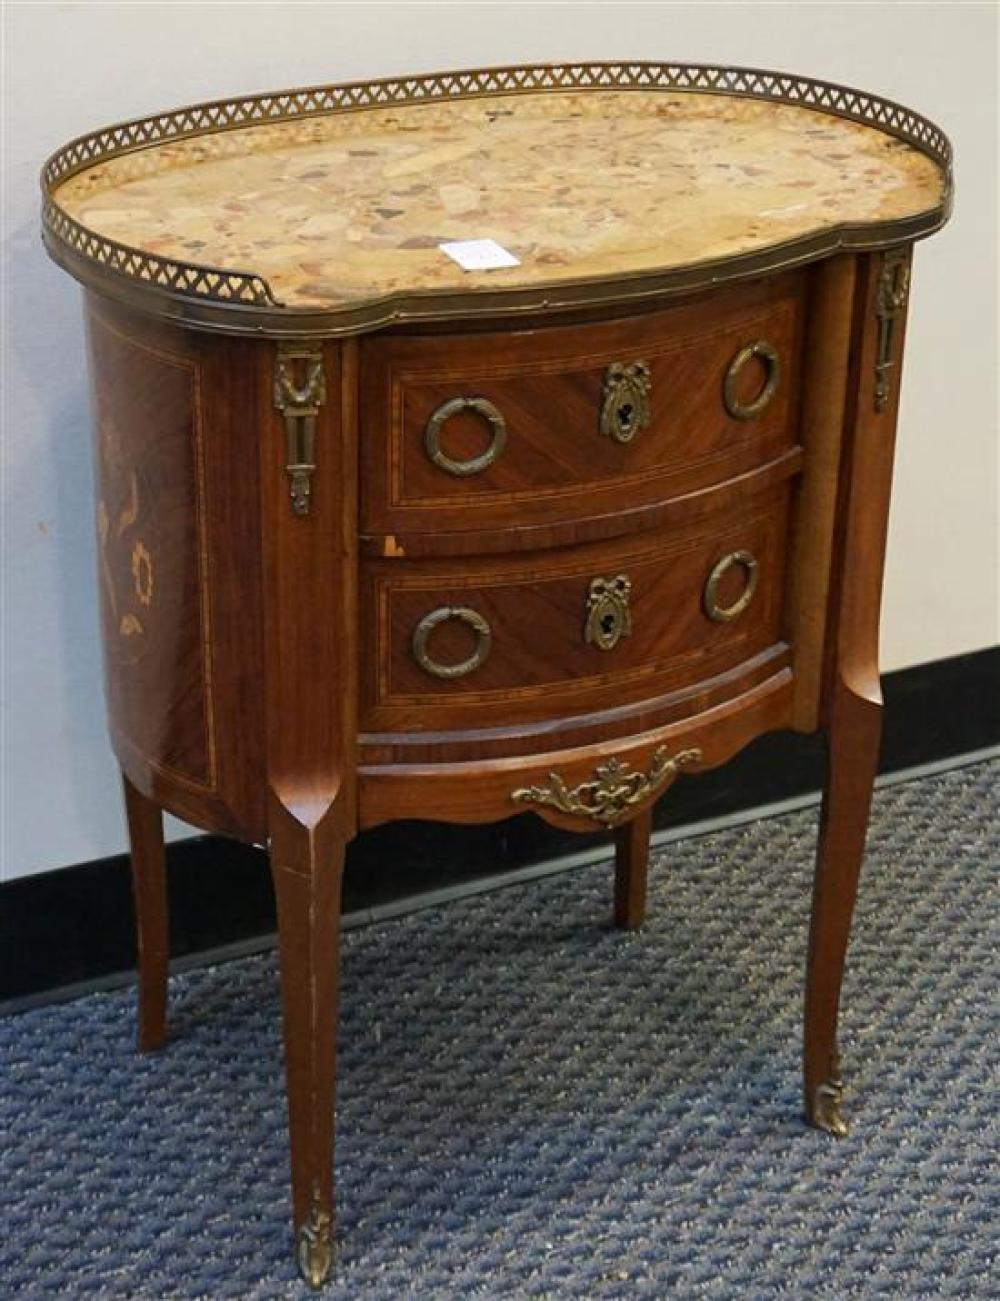 LOUIS XV STYLE MARQUETRY KINGSWOOD 32194c